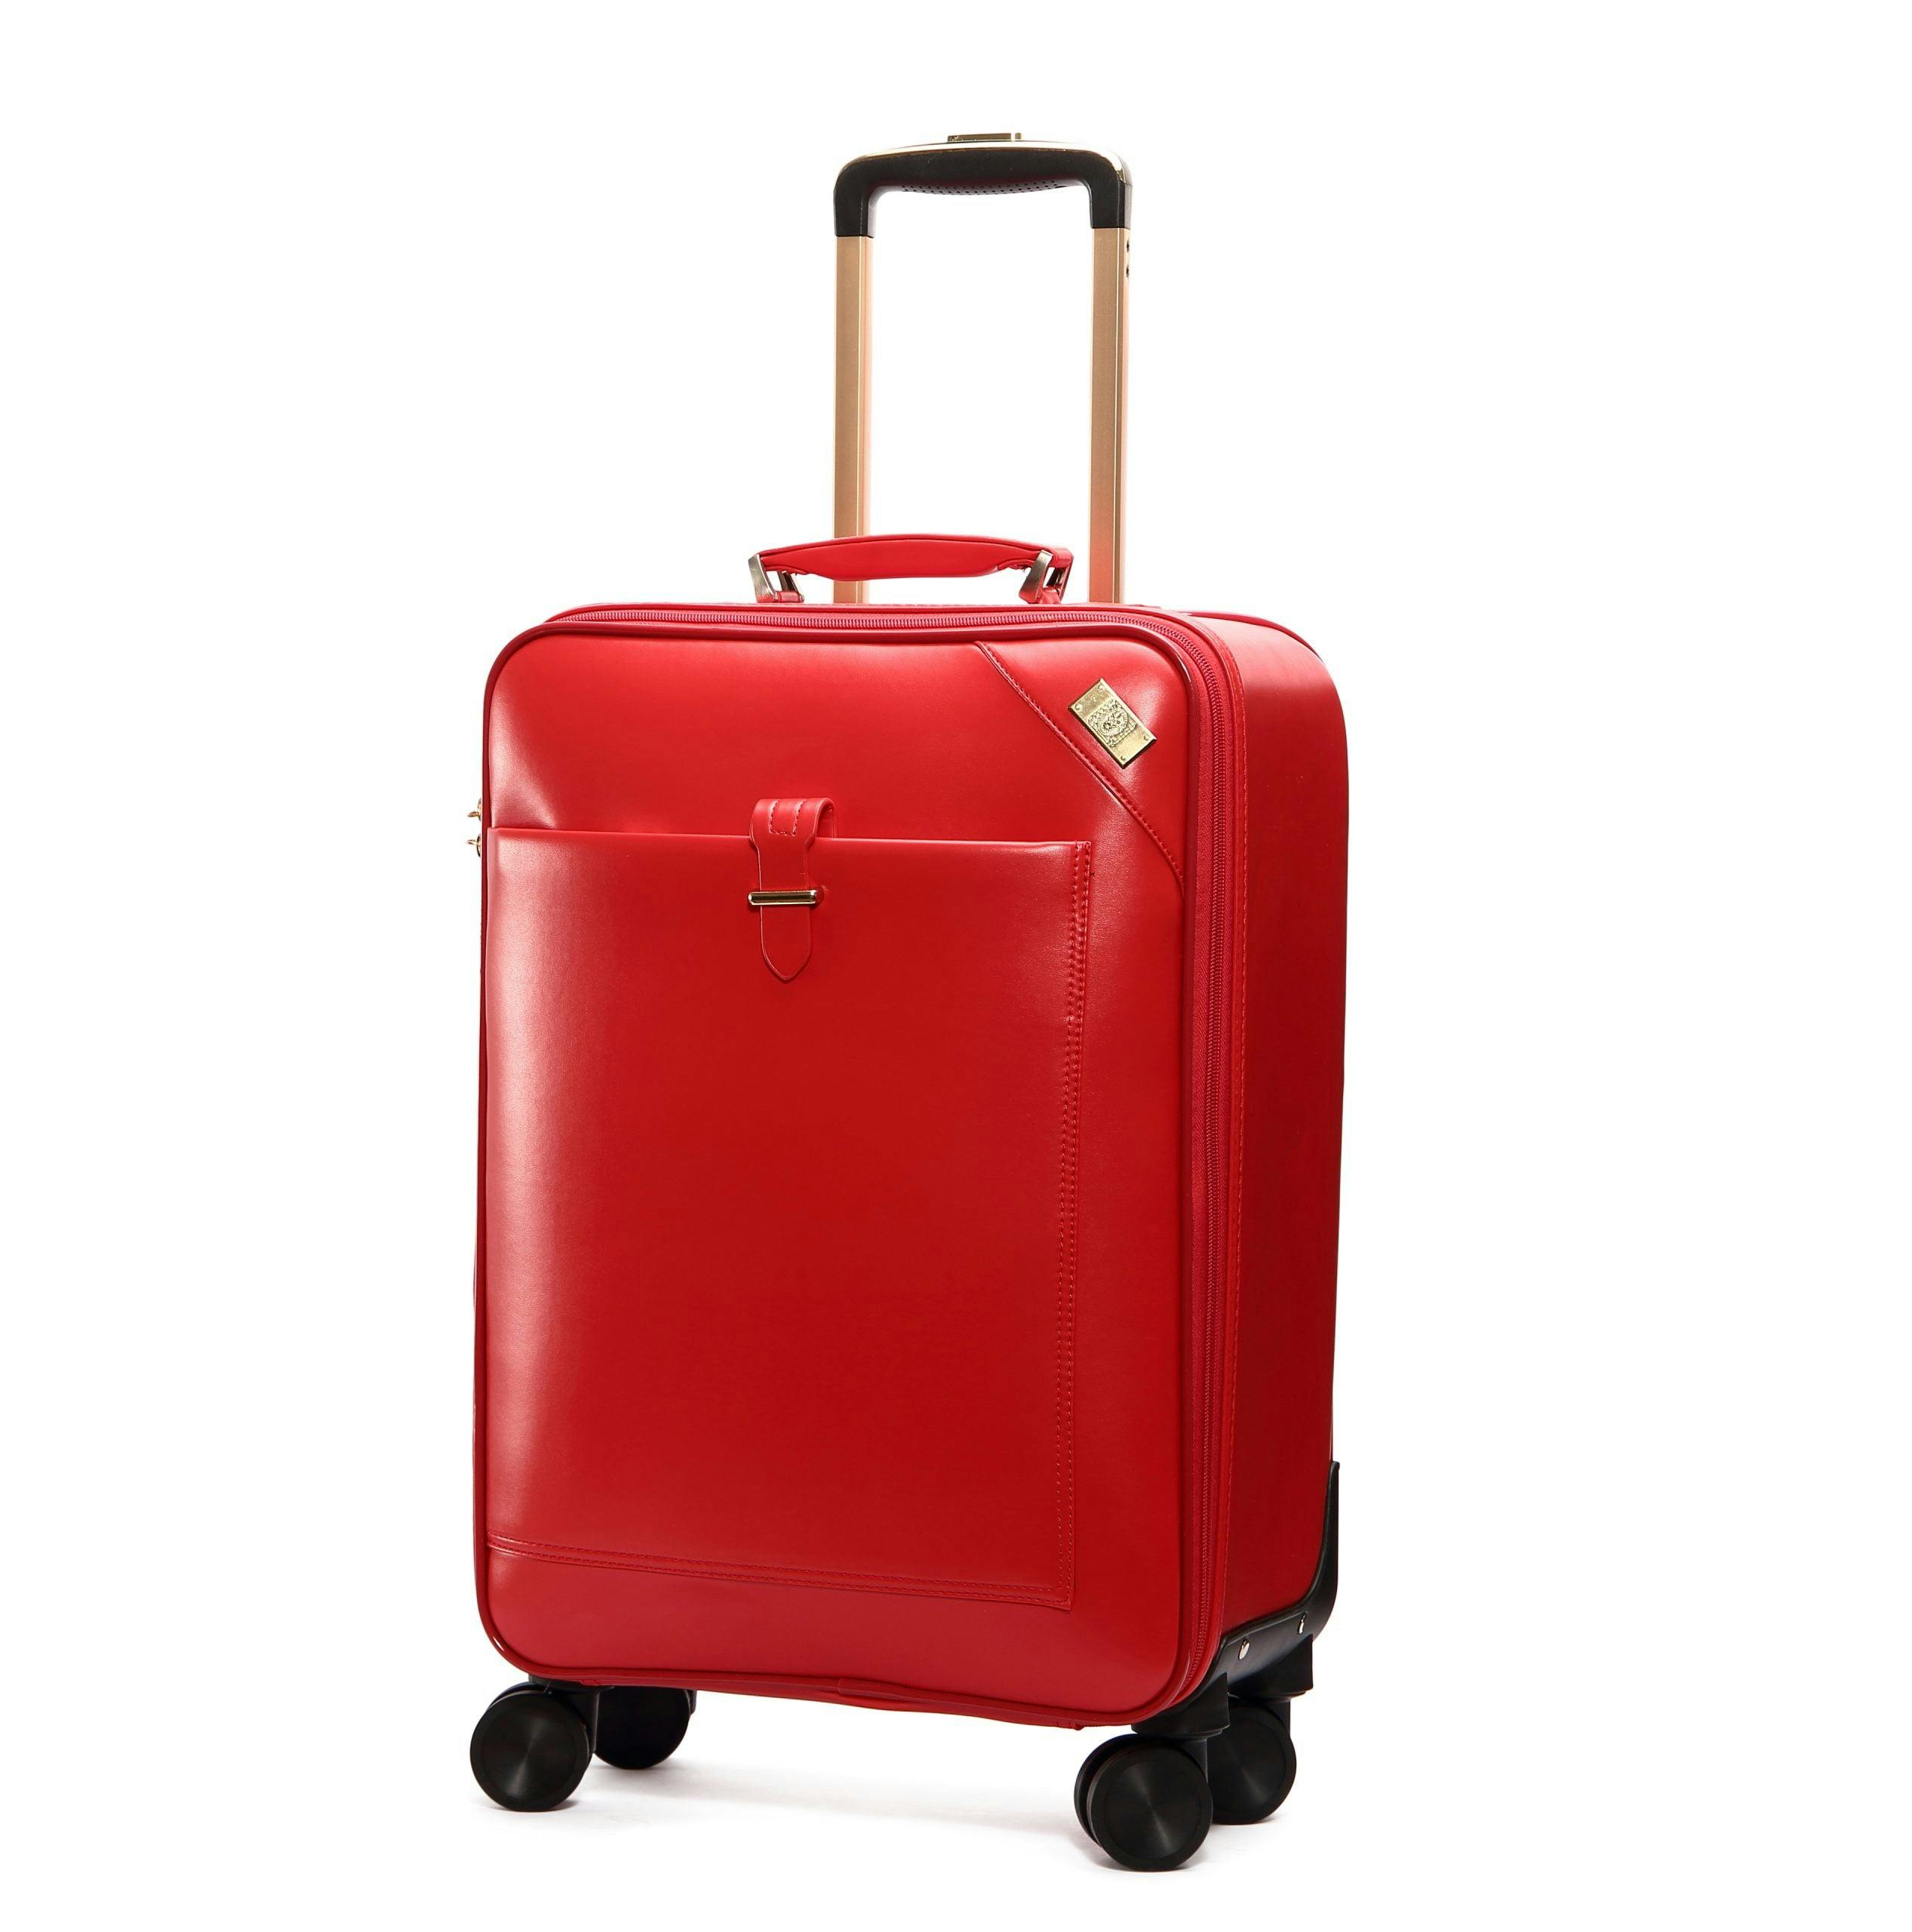 SEMMS RED LUXURIOUS LEATHER LUGGAGE